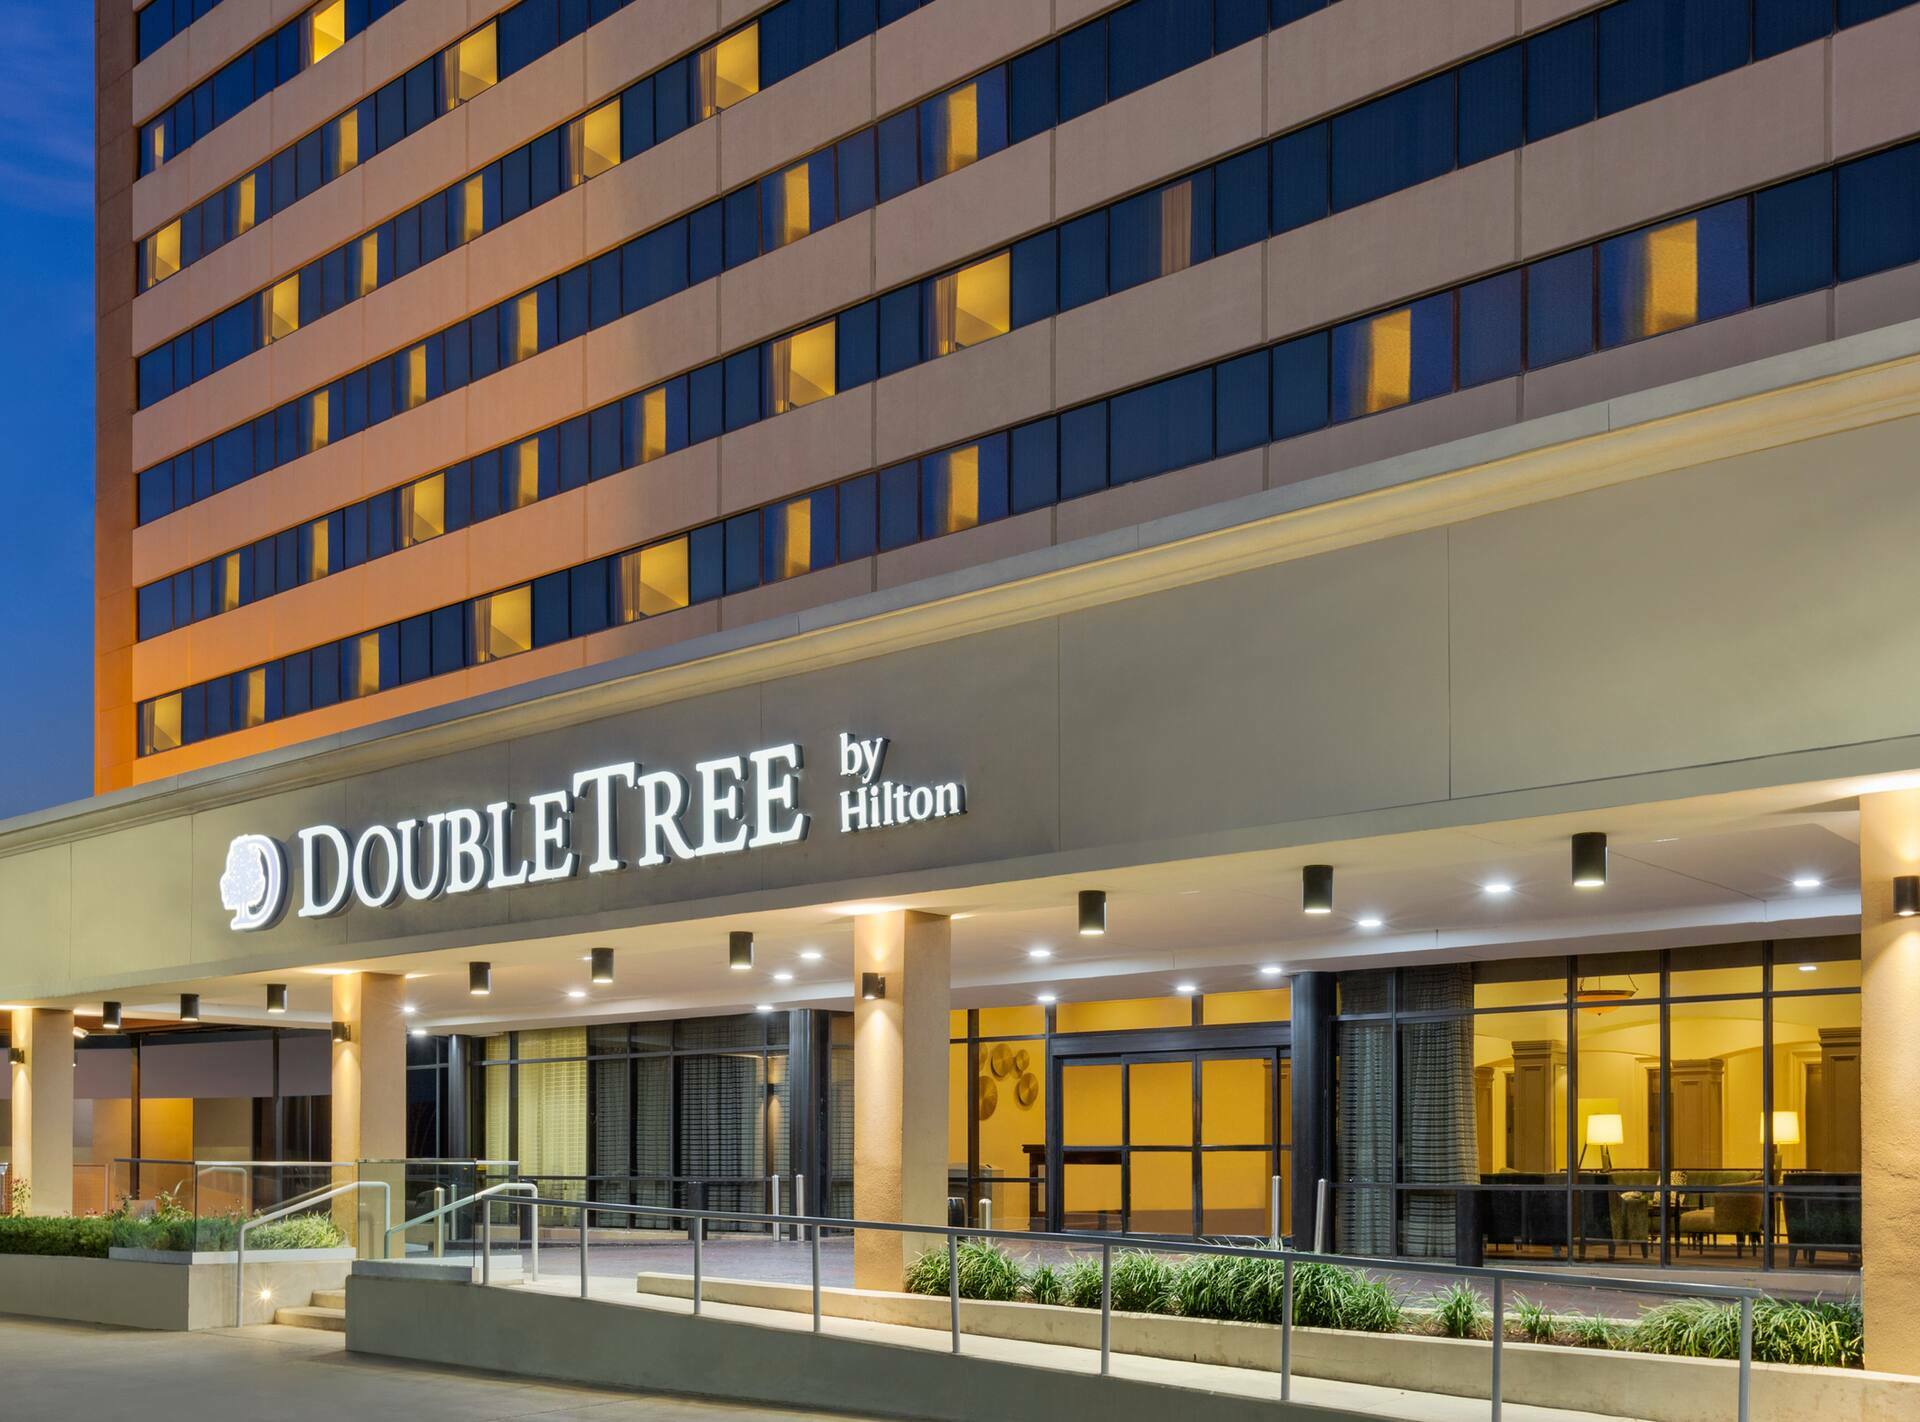 Photo of DoubleTree by Hilton Houston Medical Center Hotel & Suites, Houston, TX